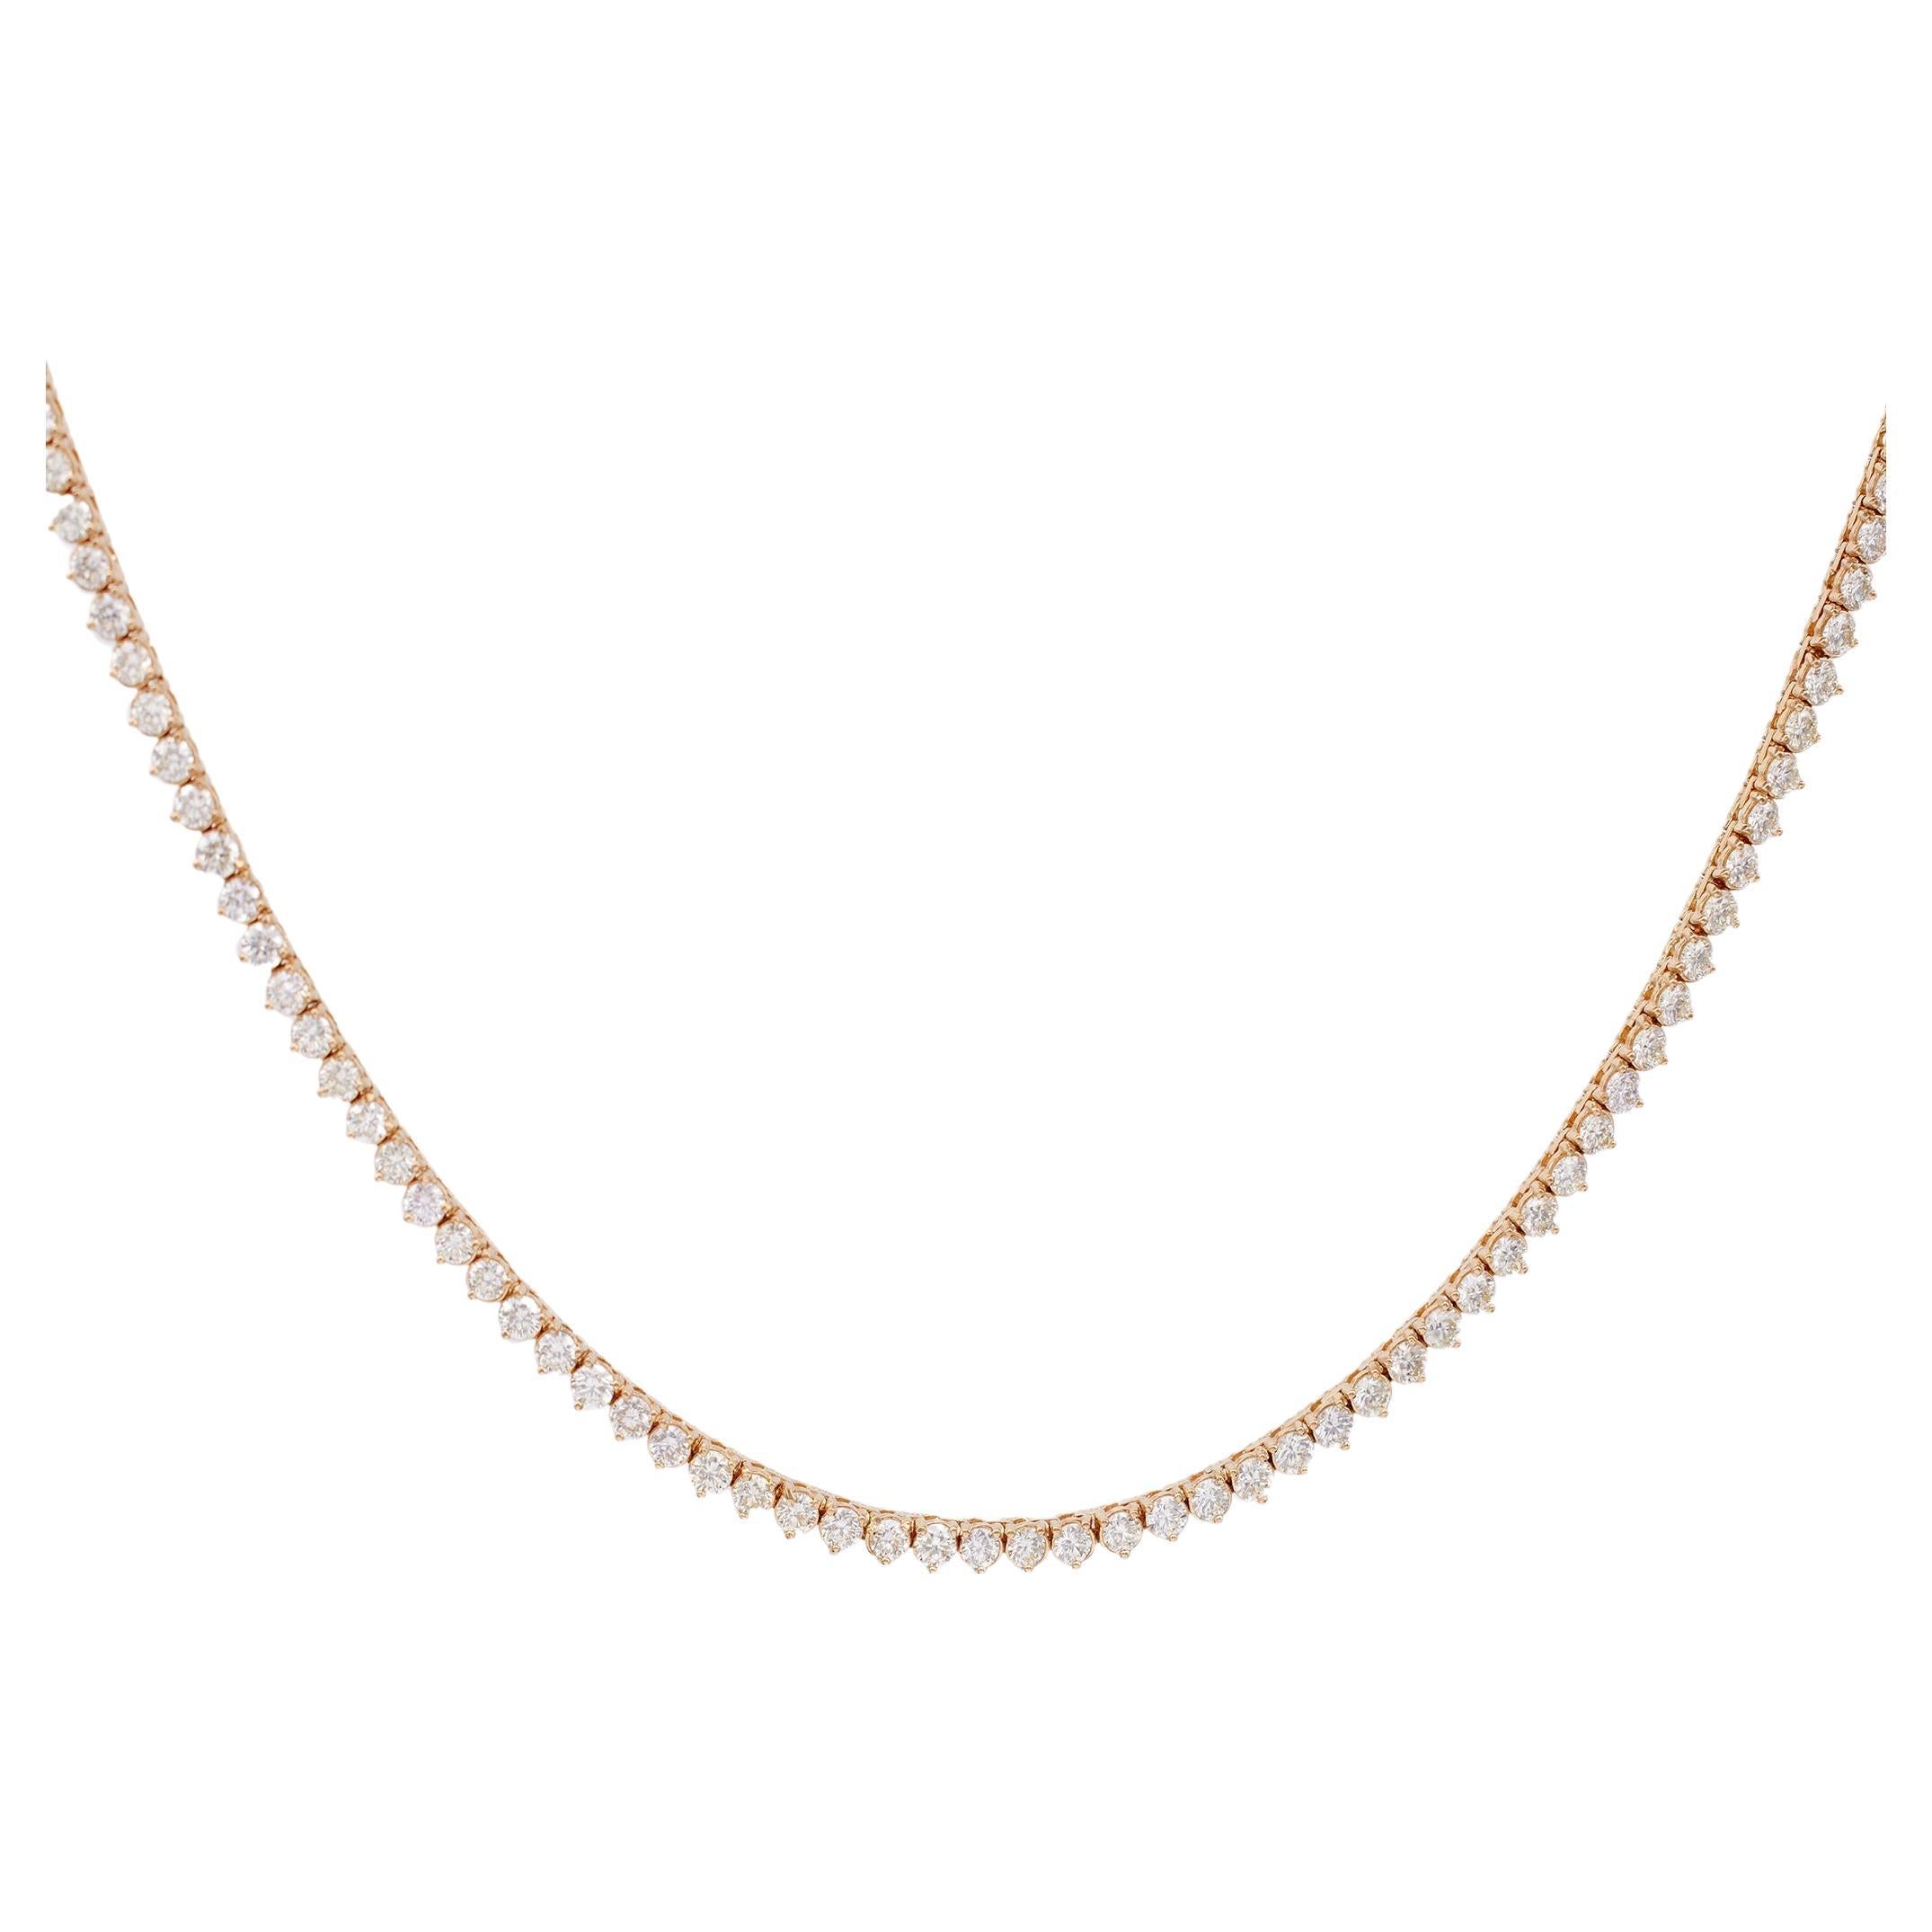 5.38 Carat Total Weight Diamond 14k Yellow Gold Tennis Necklace For Sale